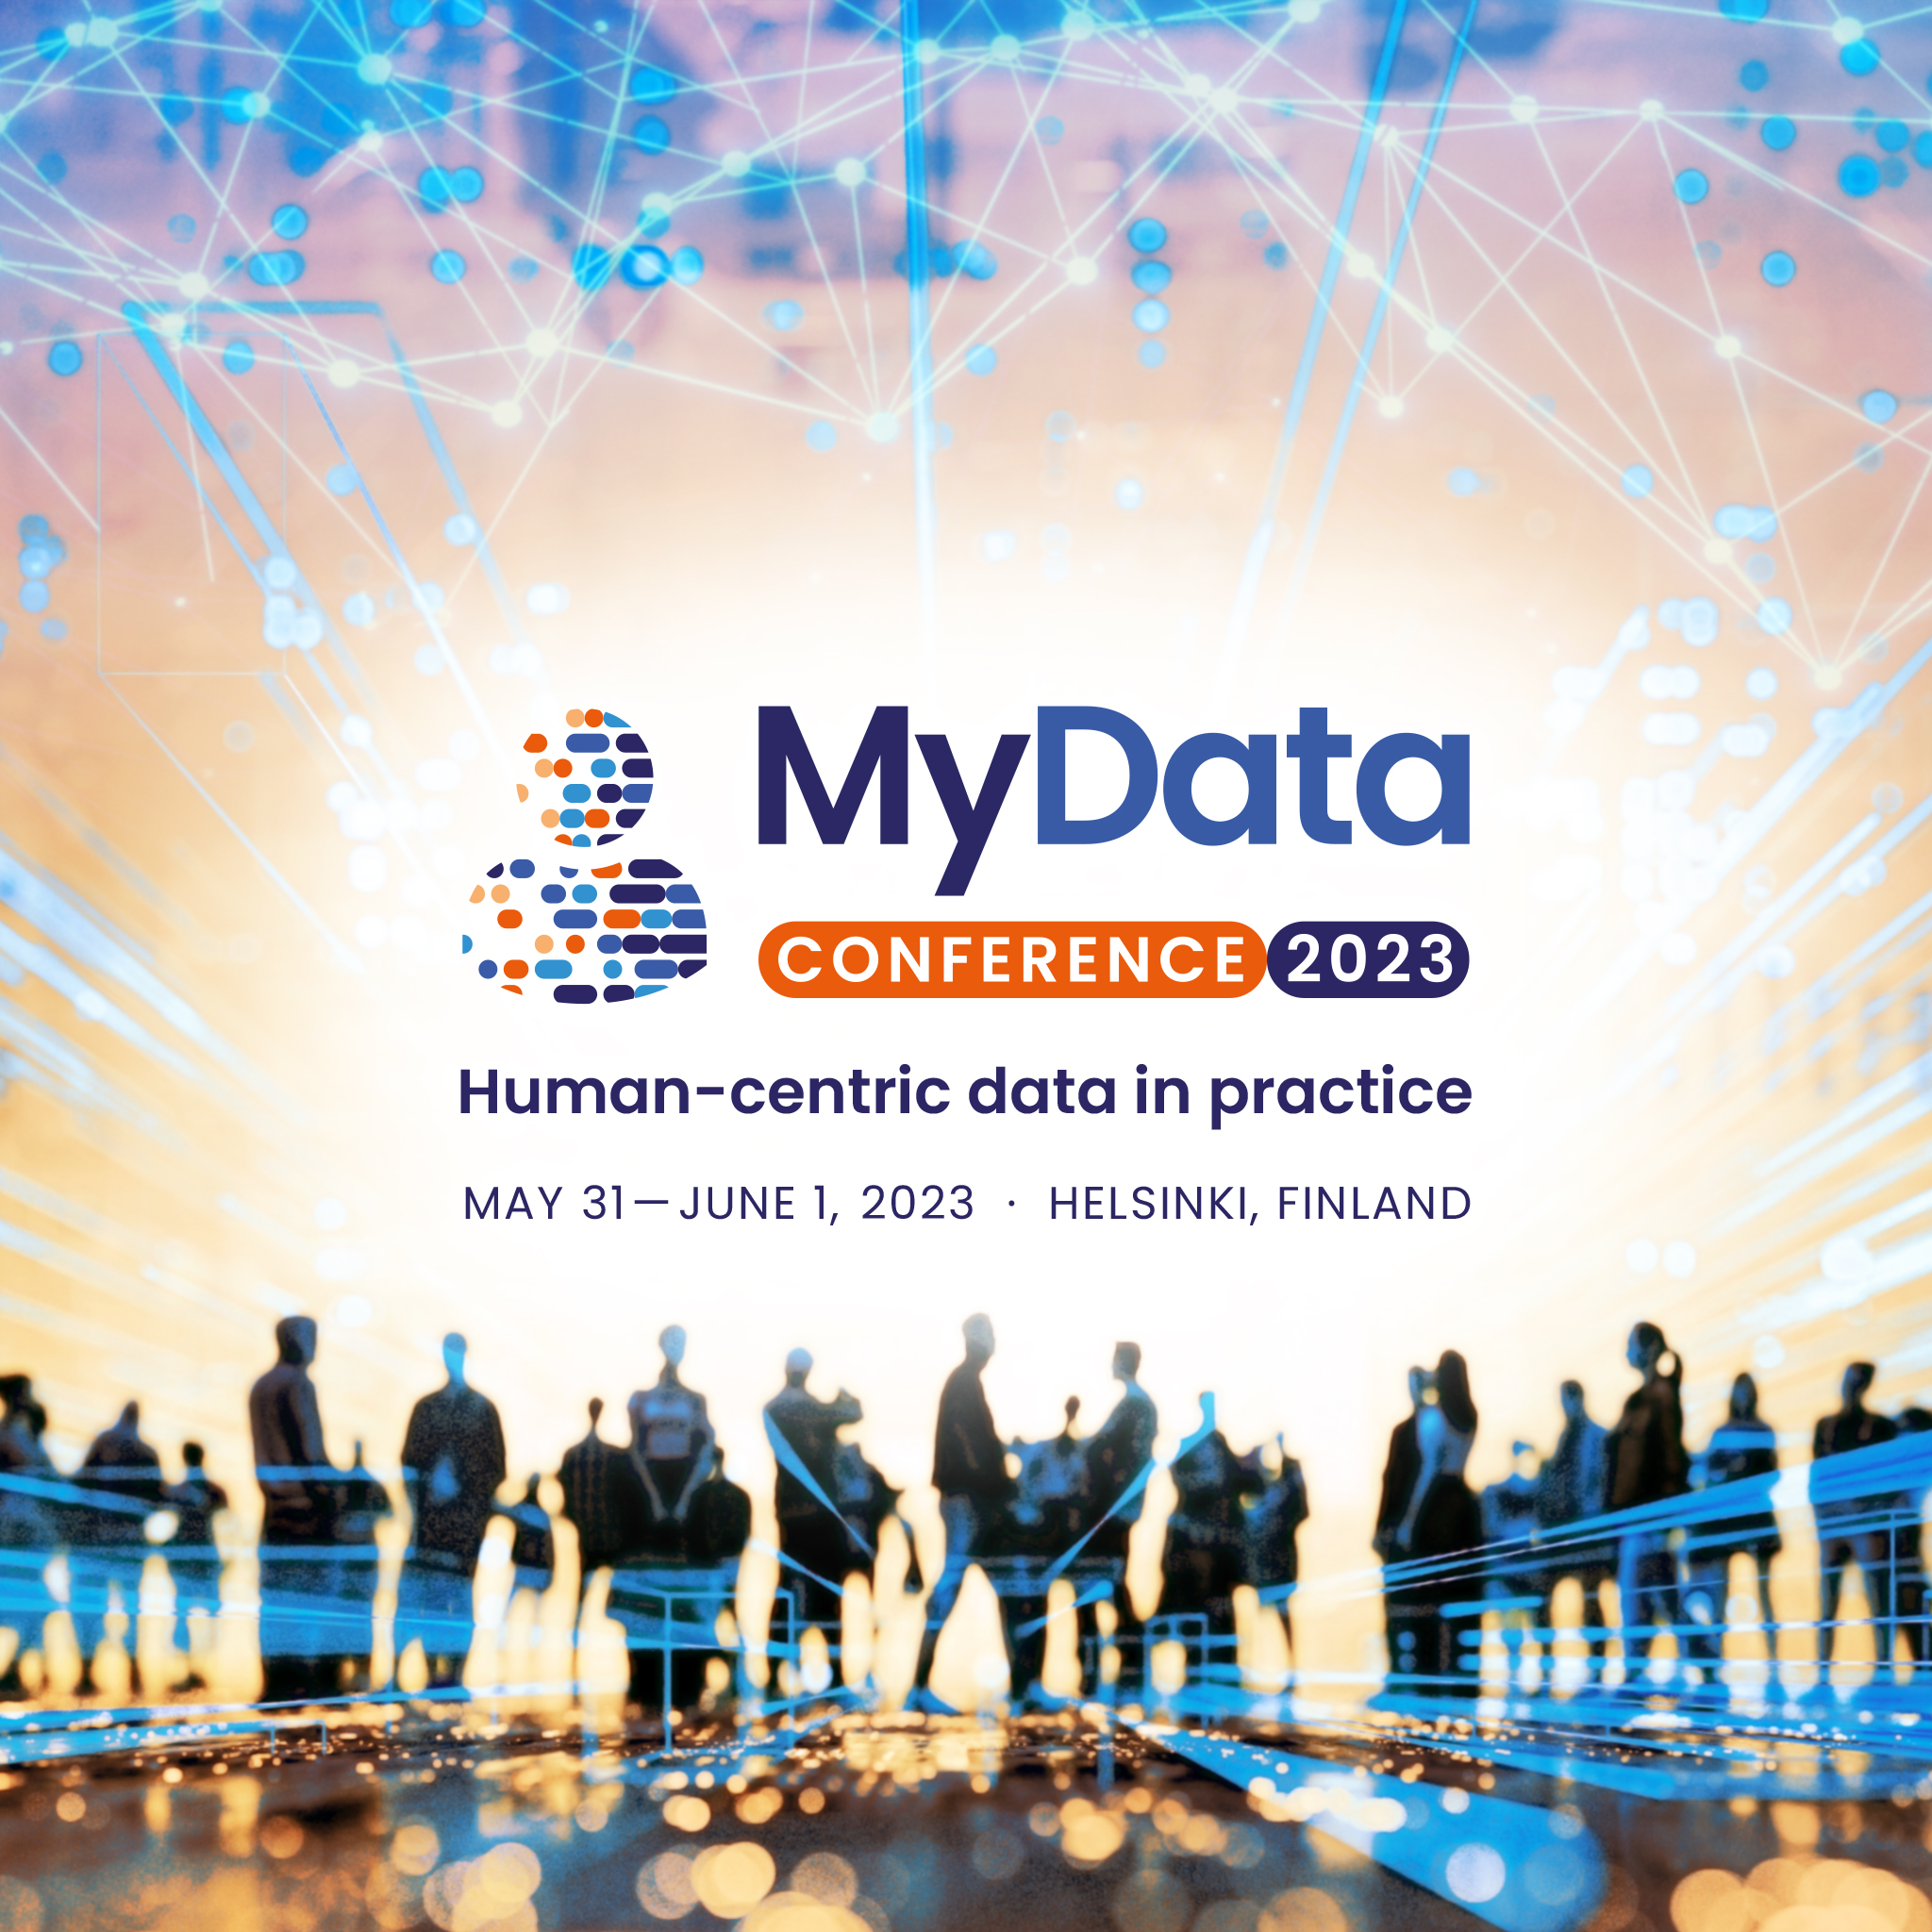 Your five reasons to attend the MyData 2023 Conference